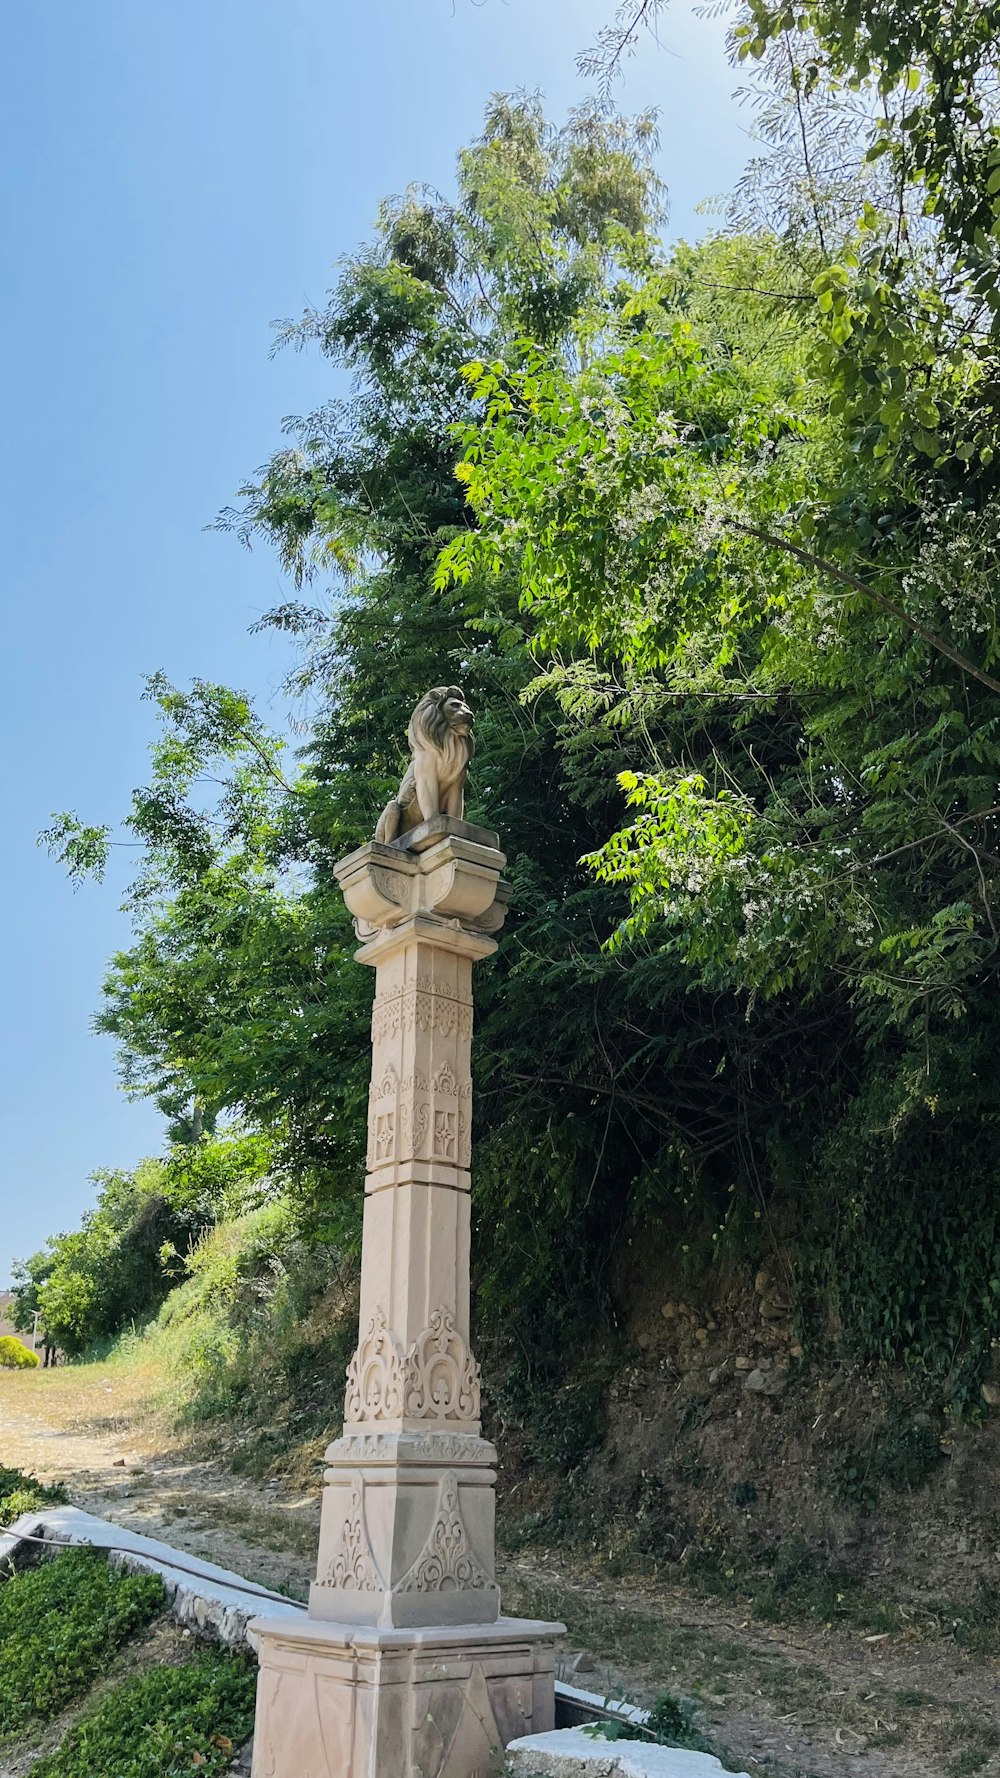 a statue of a person on a stone pillar in front of trees